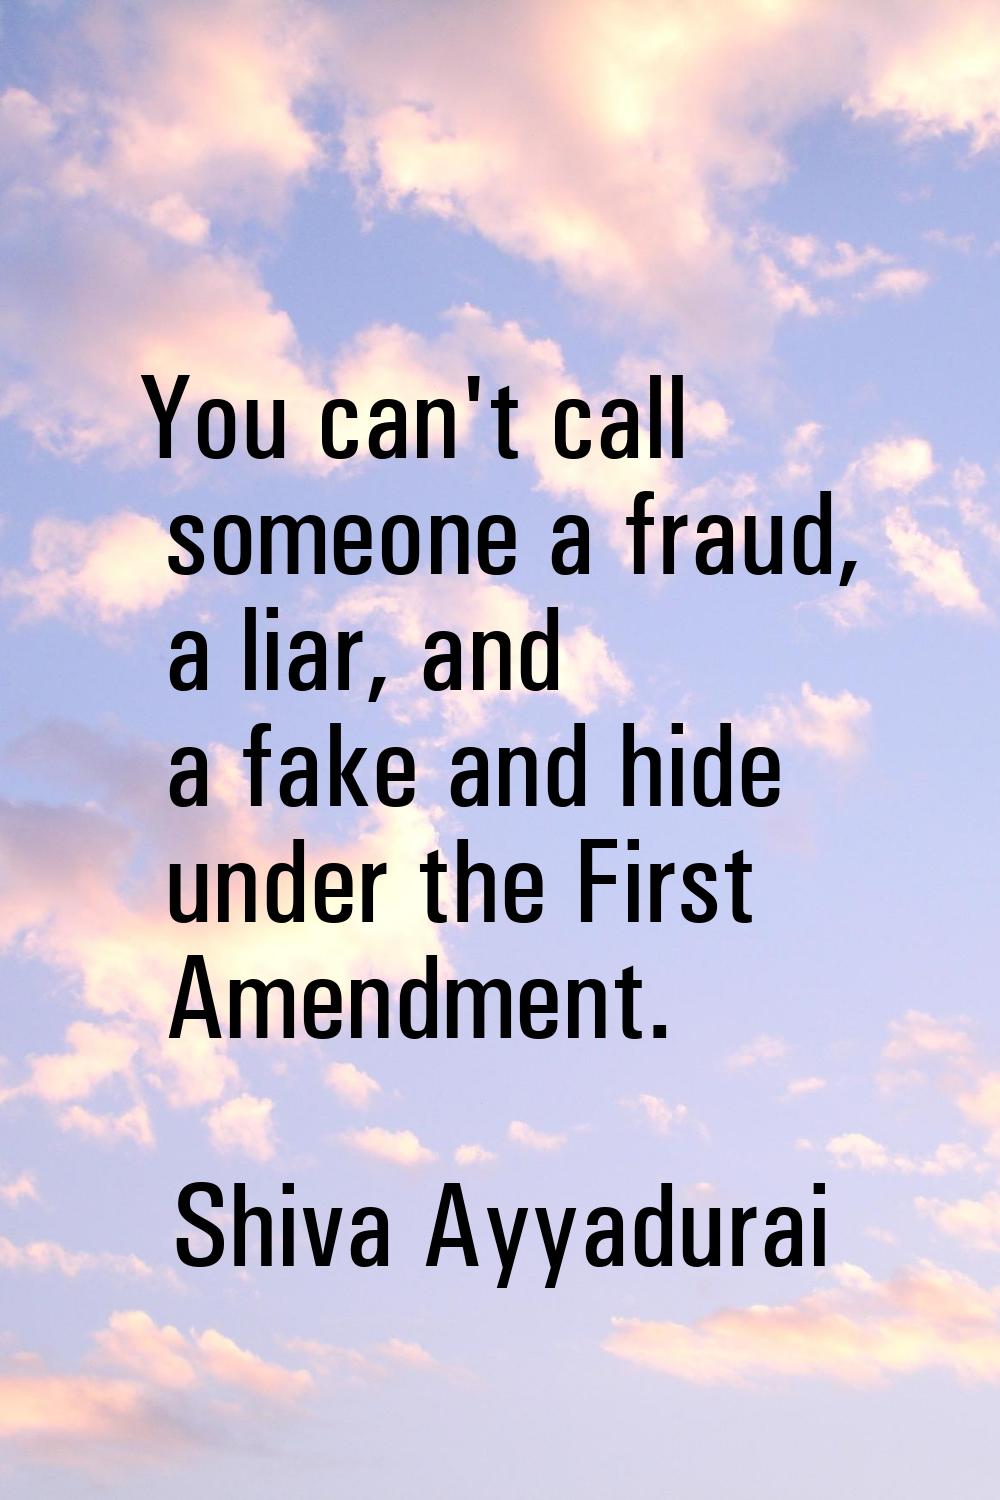 You can't call someone a fraud, a liar, and a fake and hide under the First Amendment.